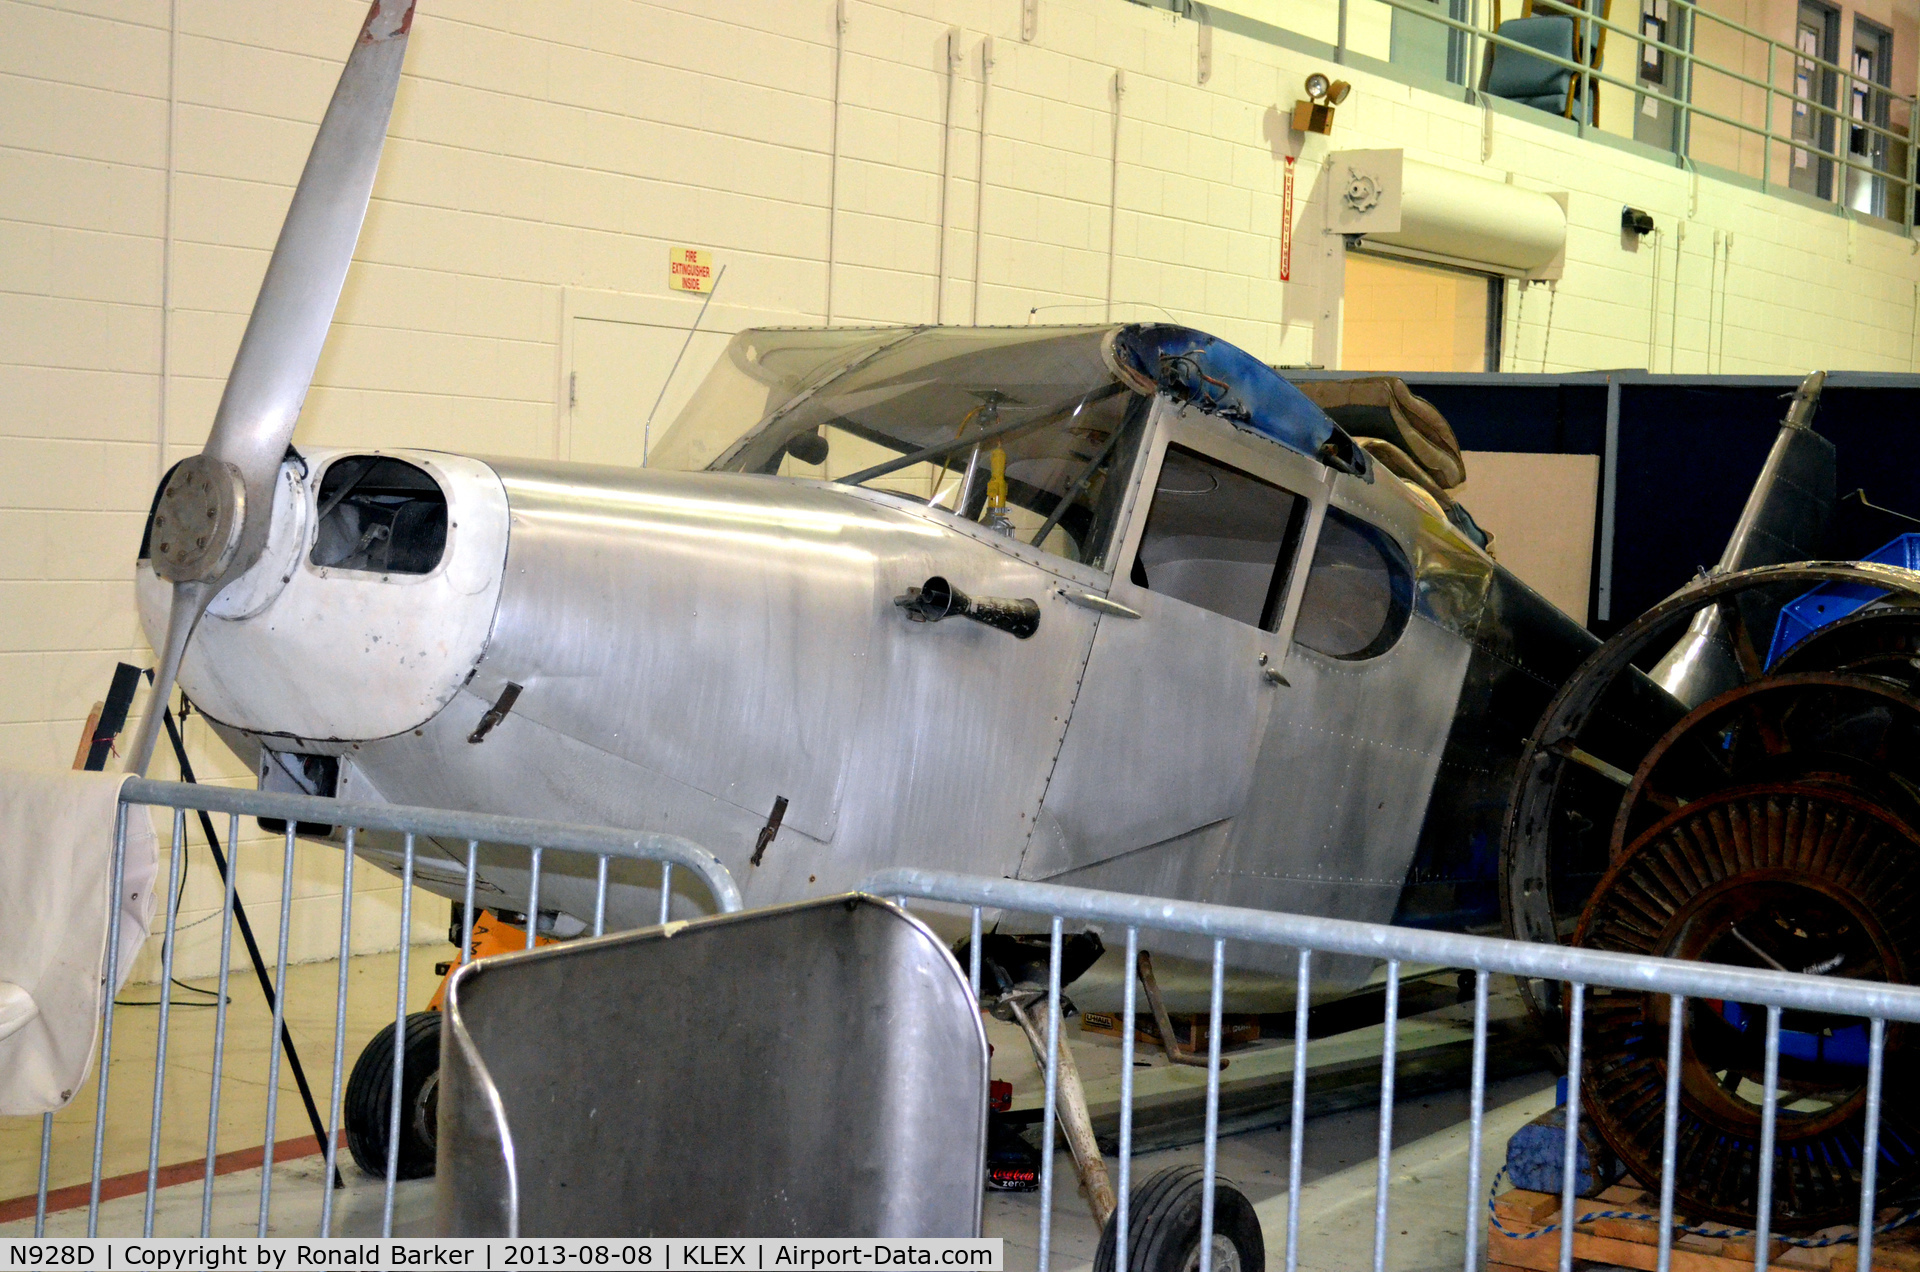 N928D, 1947 Stinson 108-2 Voyager C/N 108-2928, Old airplane at the Aviation Museum of KY